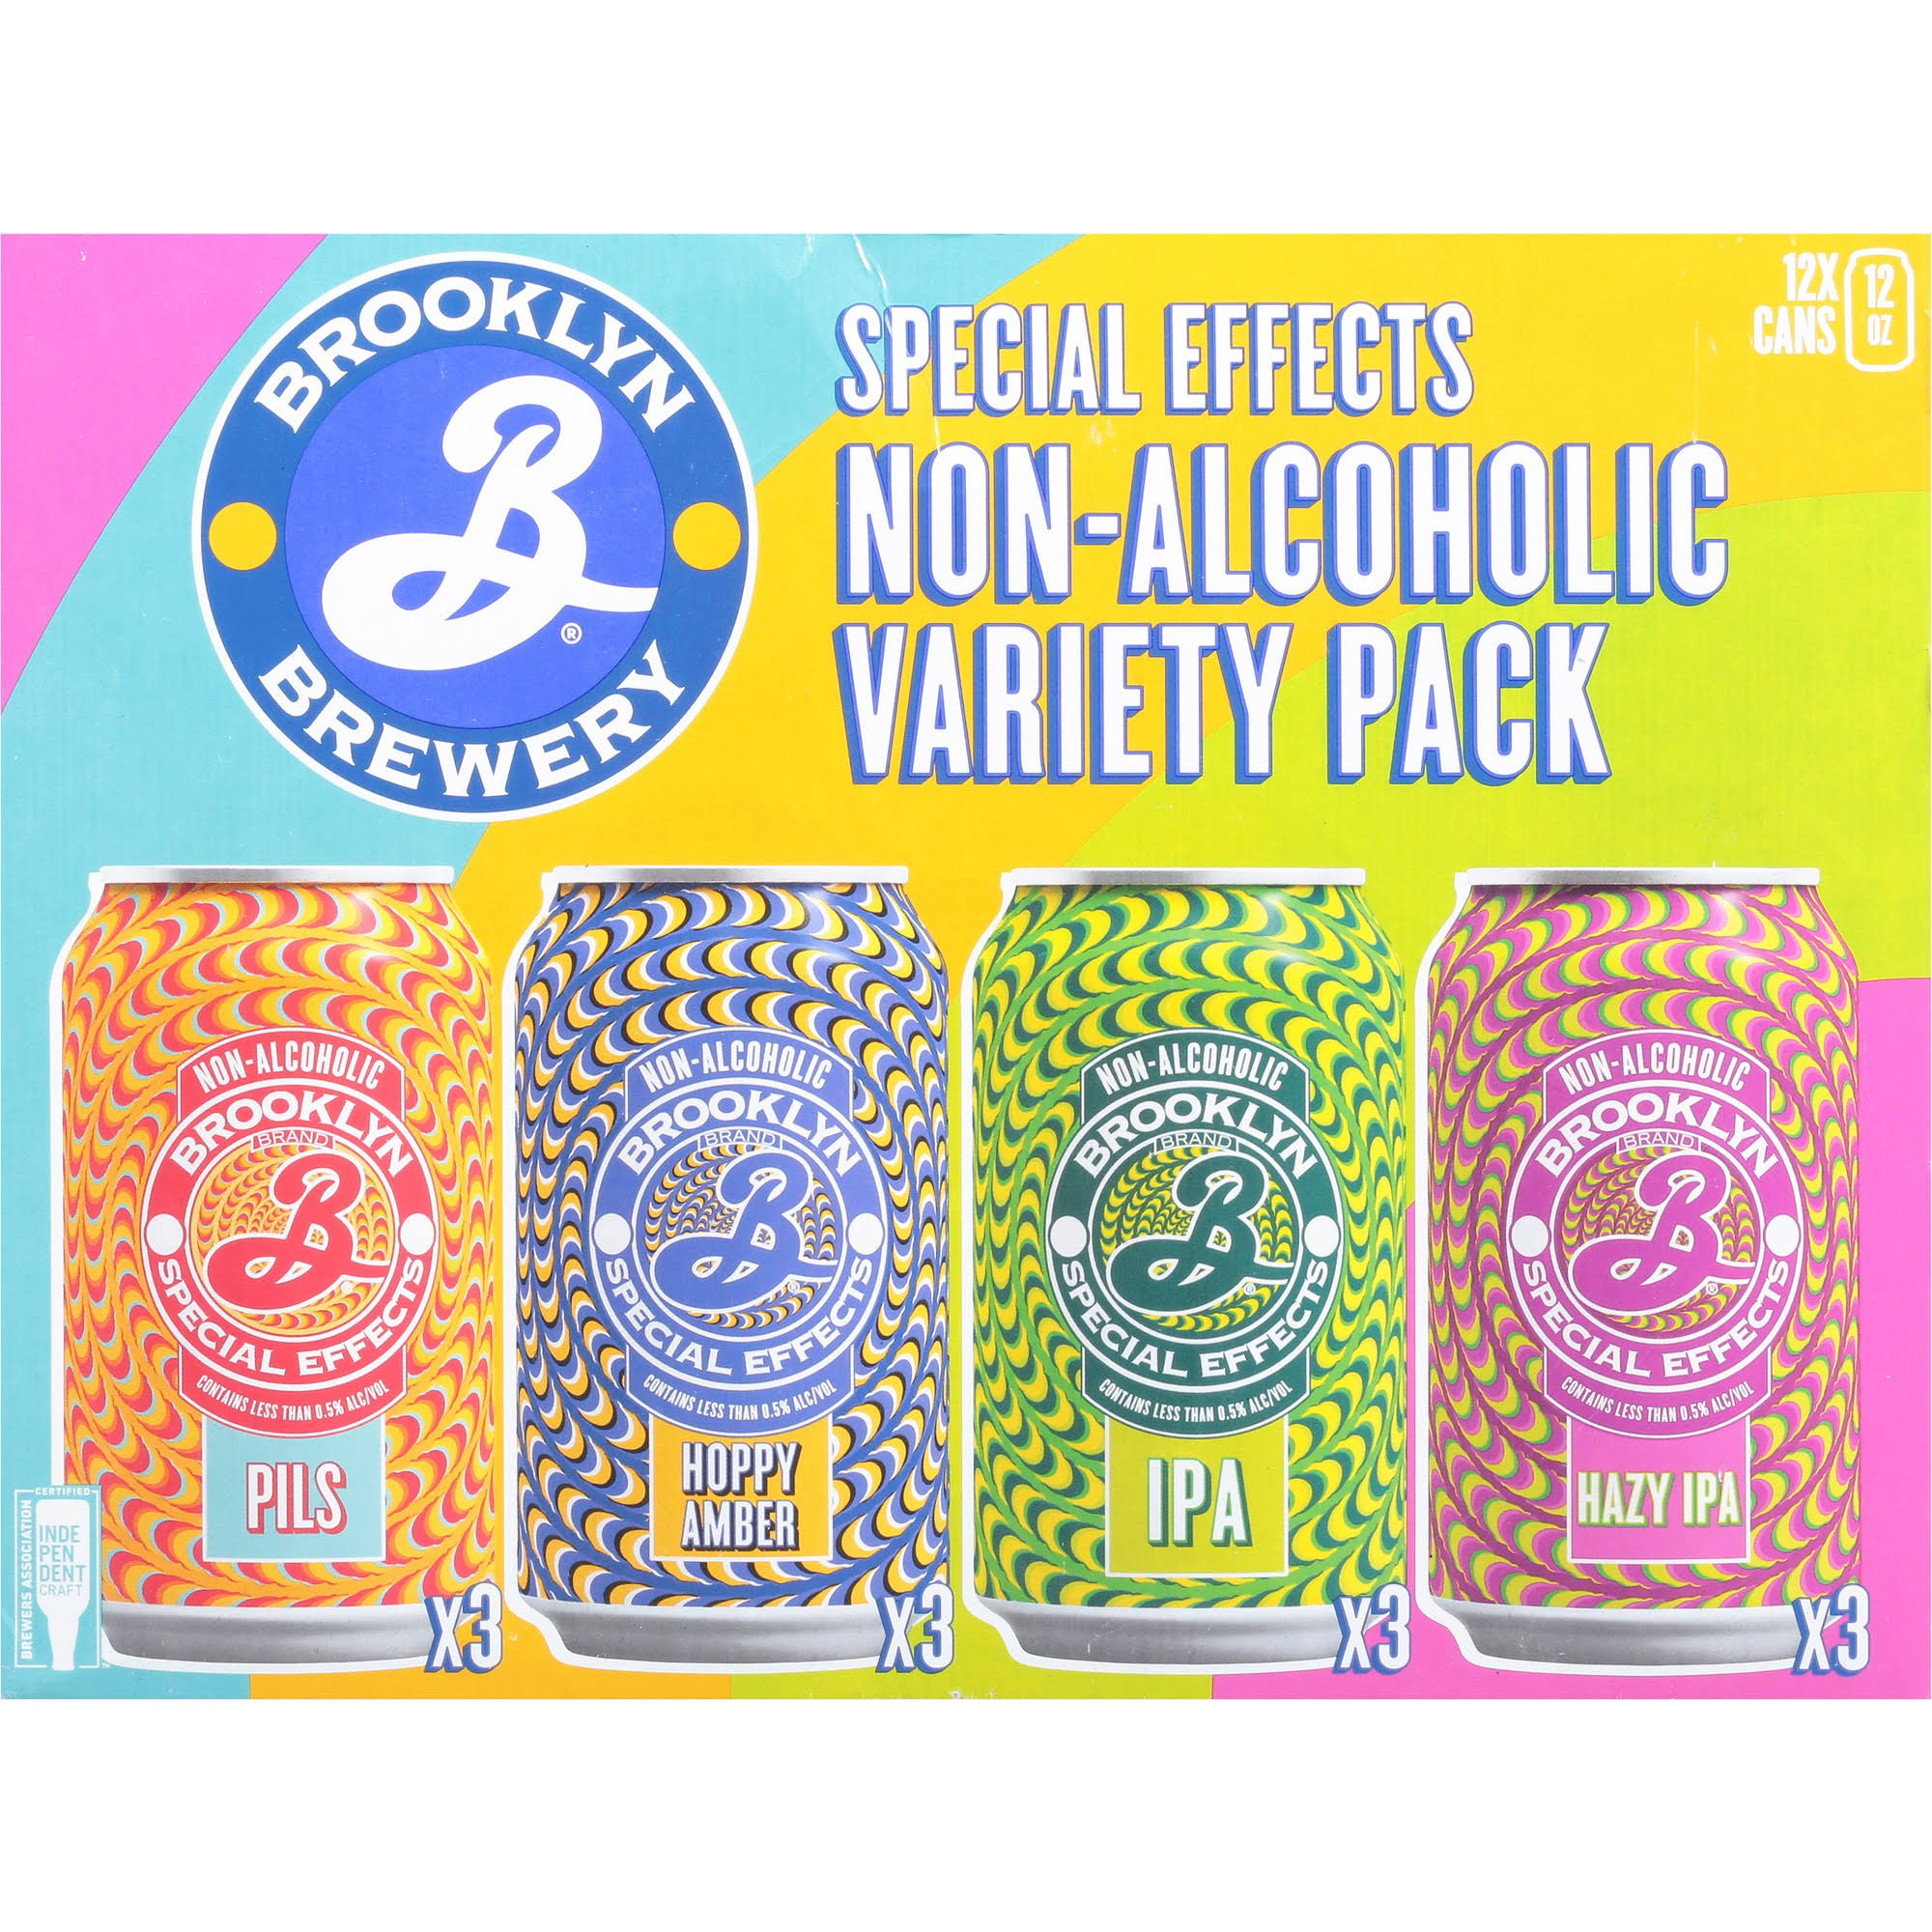 Brooklyn Brewery Beer, Special Effects, Non-Alcoholic Variety Pack - 12 pack, 12 oz cans